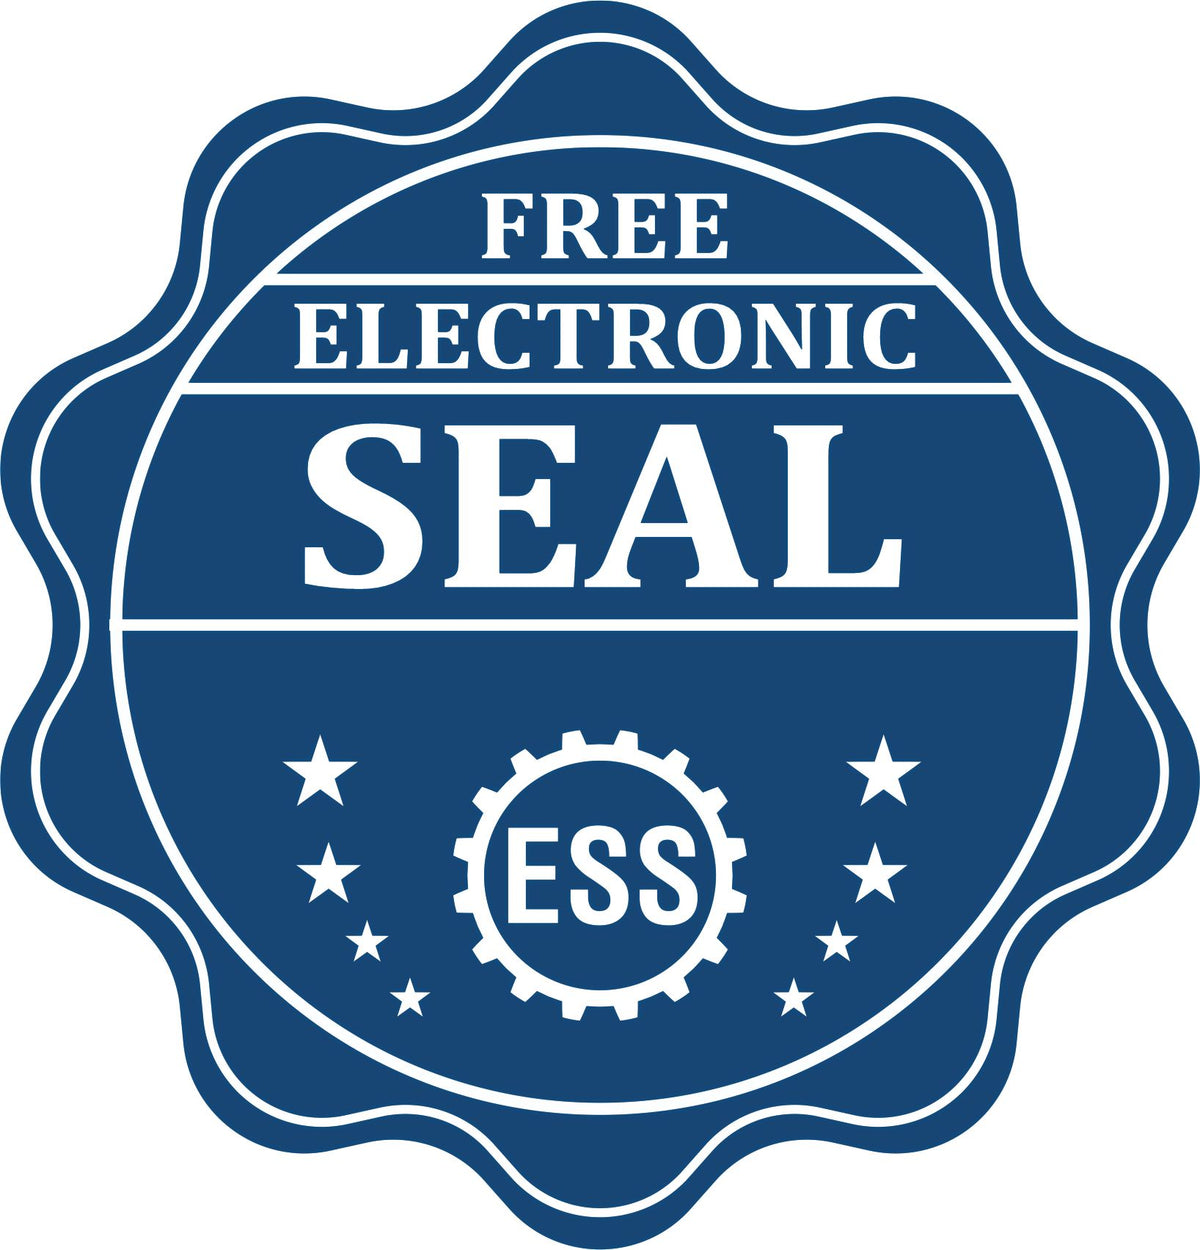 A badge showing a free electronic seal for the Long Reach Kentucky Land Surveyor Seal with stars and the ESS gear on the emblem.